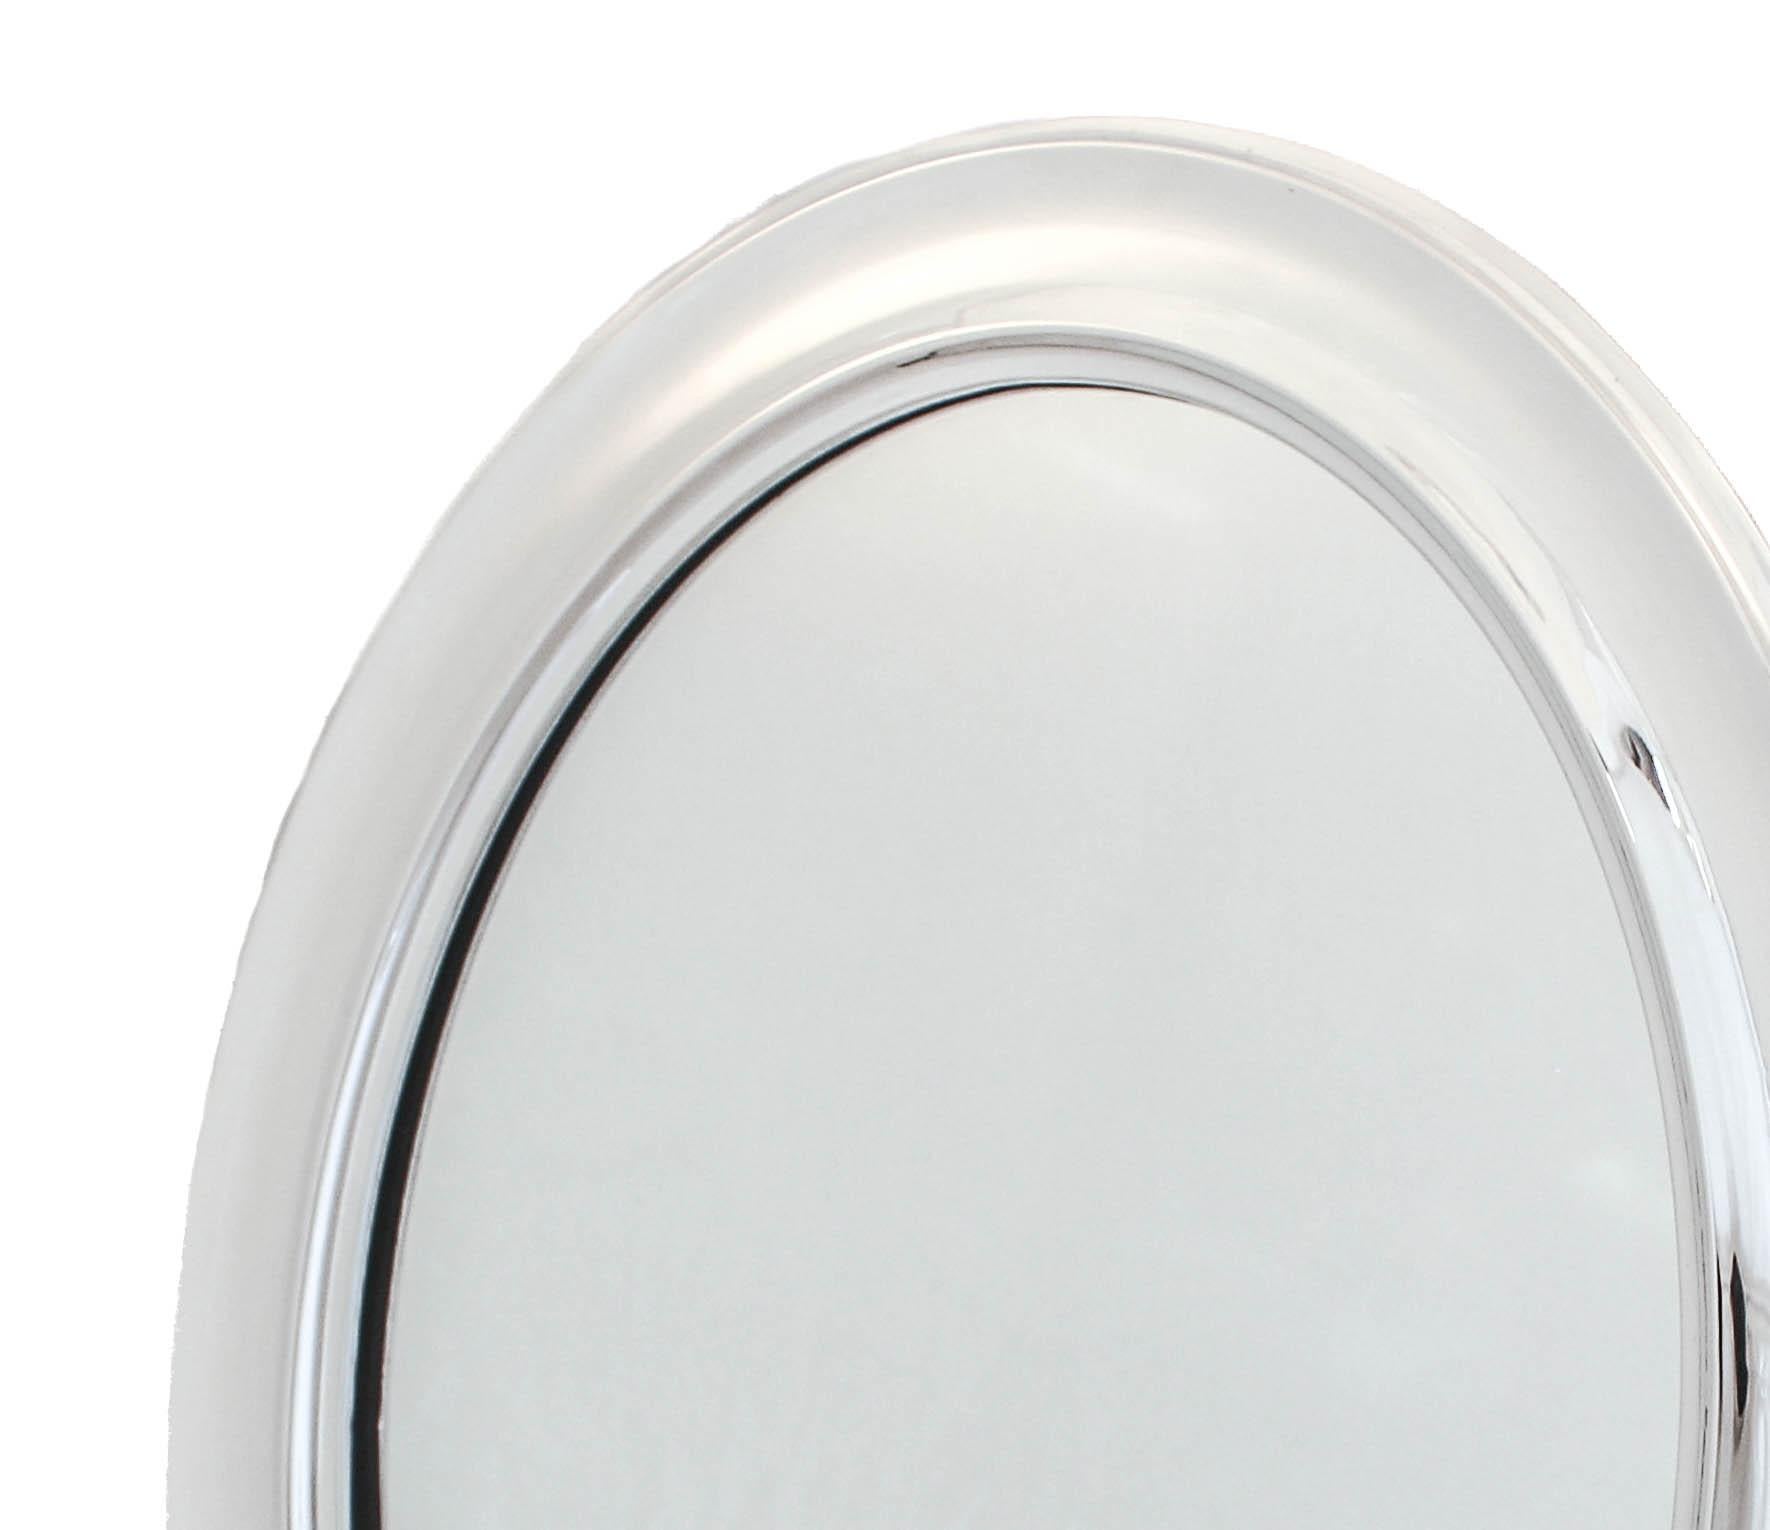 A magnificent example of sterling silver Art Deco design. This vanity mirror was manufactured by I. N. Deitsch of New York in 1920. Think Chrysler Building, F. Scott Fitzgerald and the great mansions of Long Island; it was the roaring twenties and